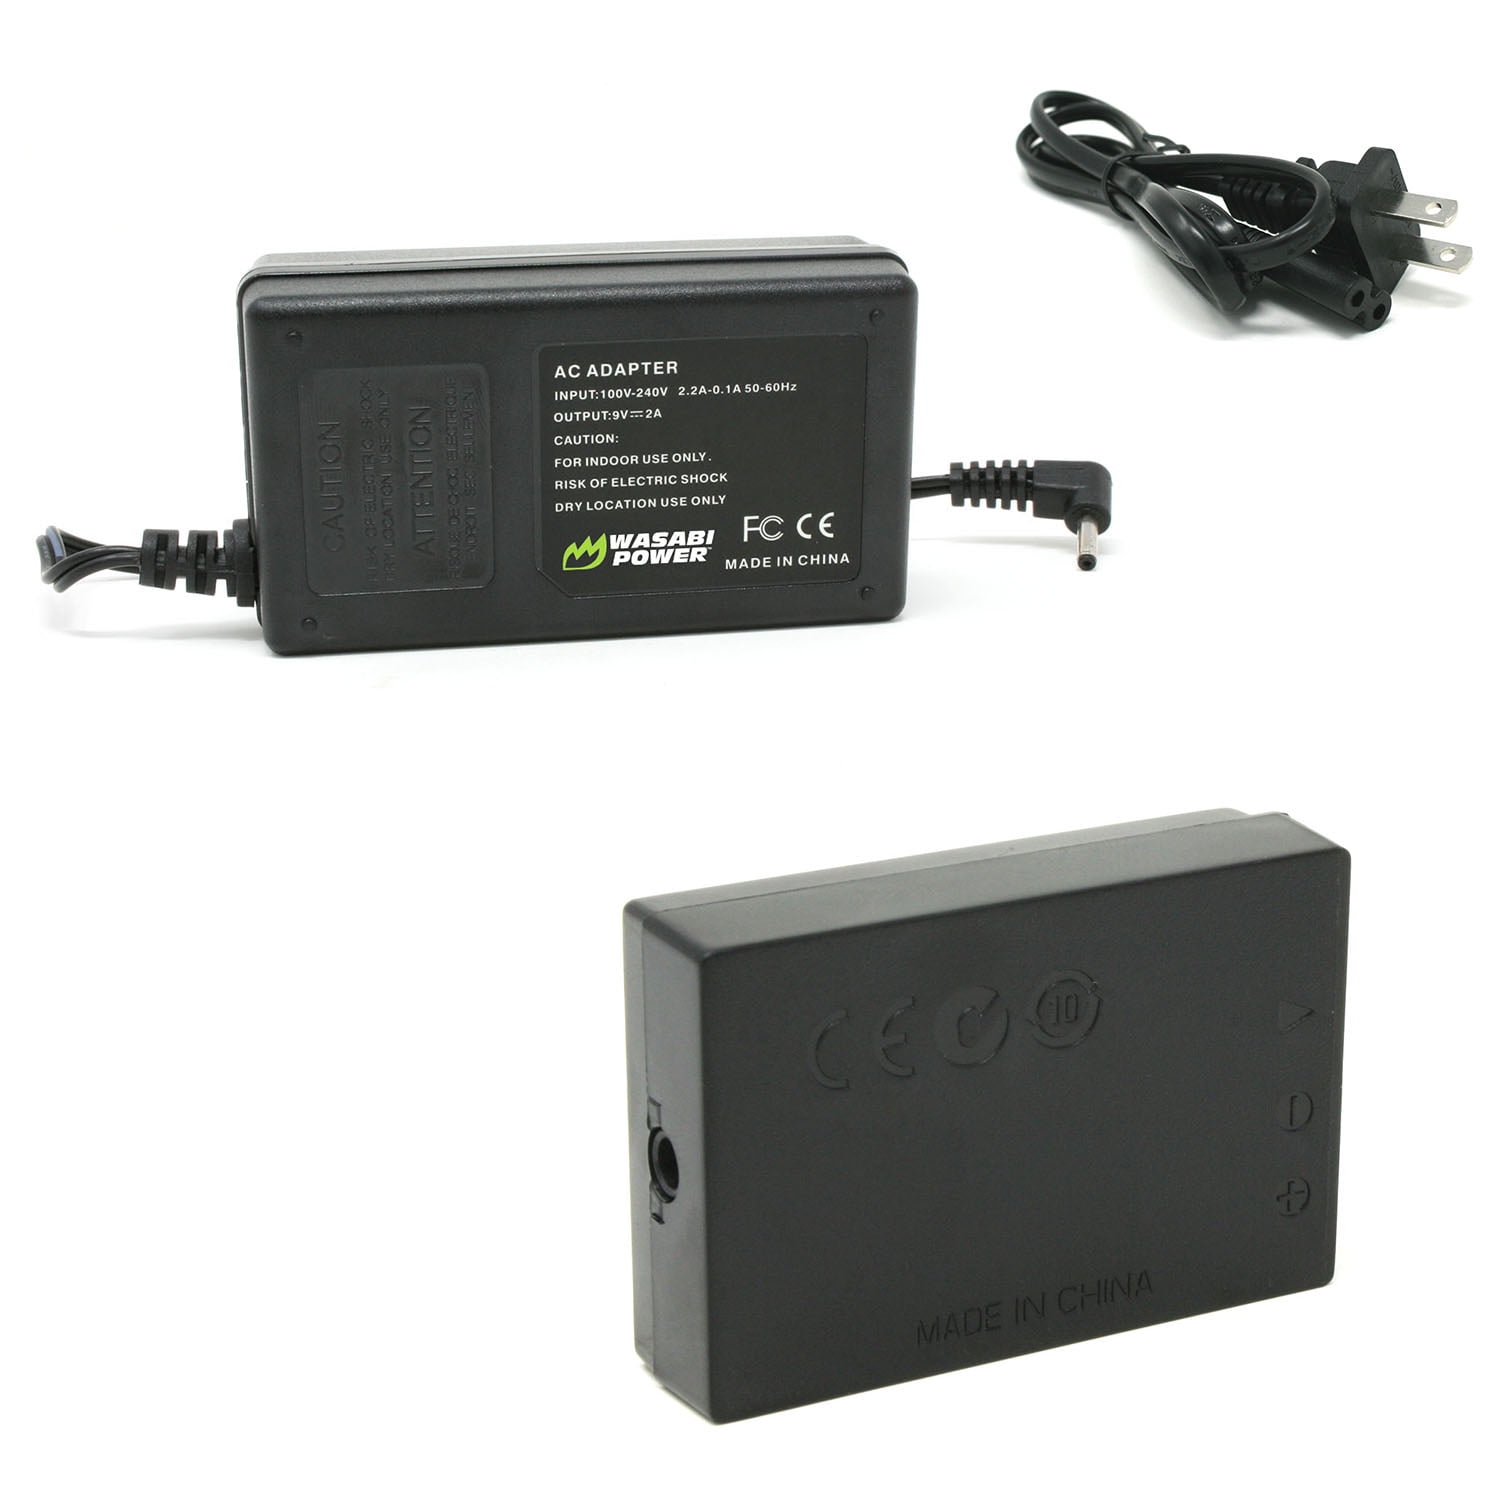 Wasabi Power AC Adapter & Charger for Canon DC410